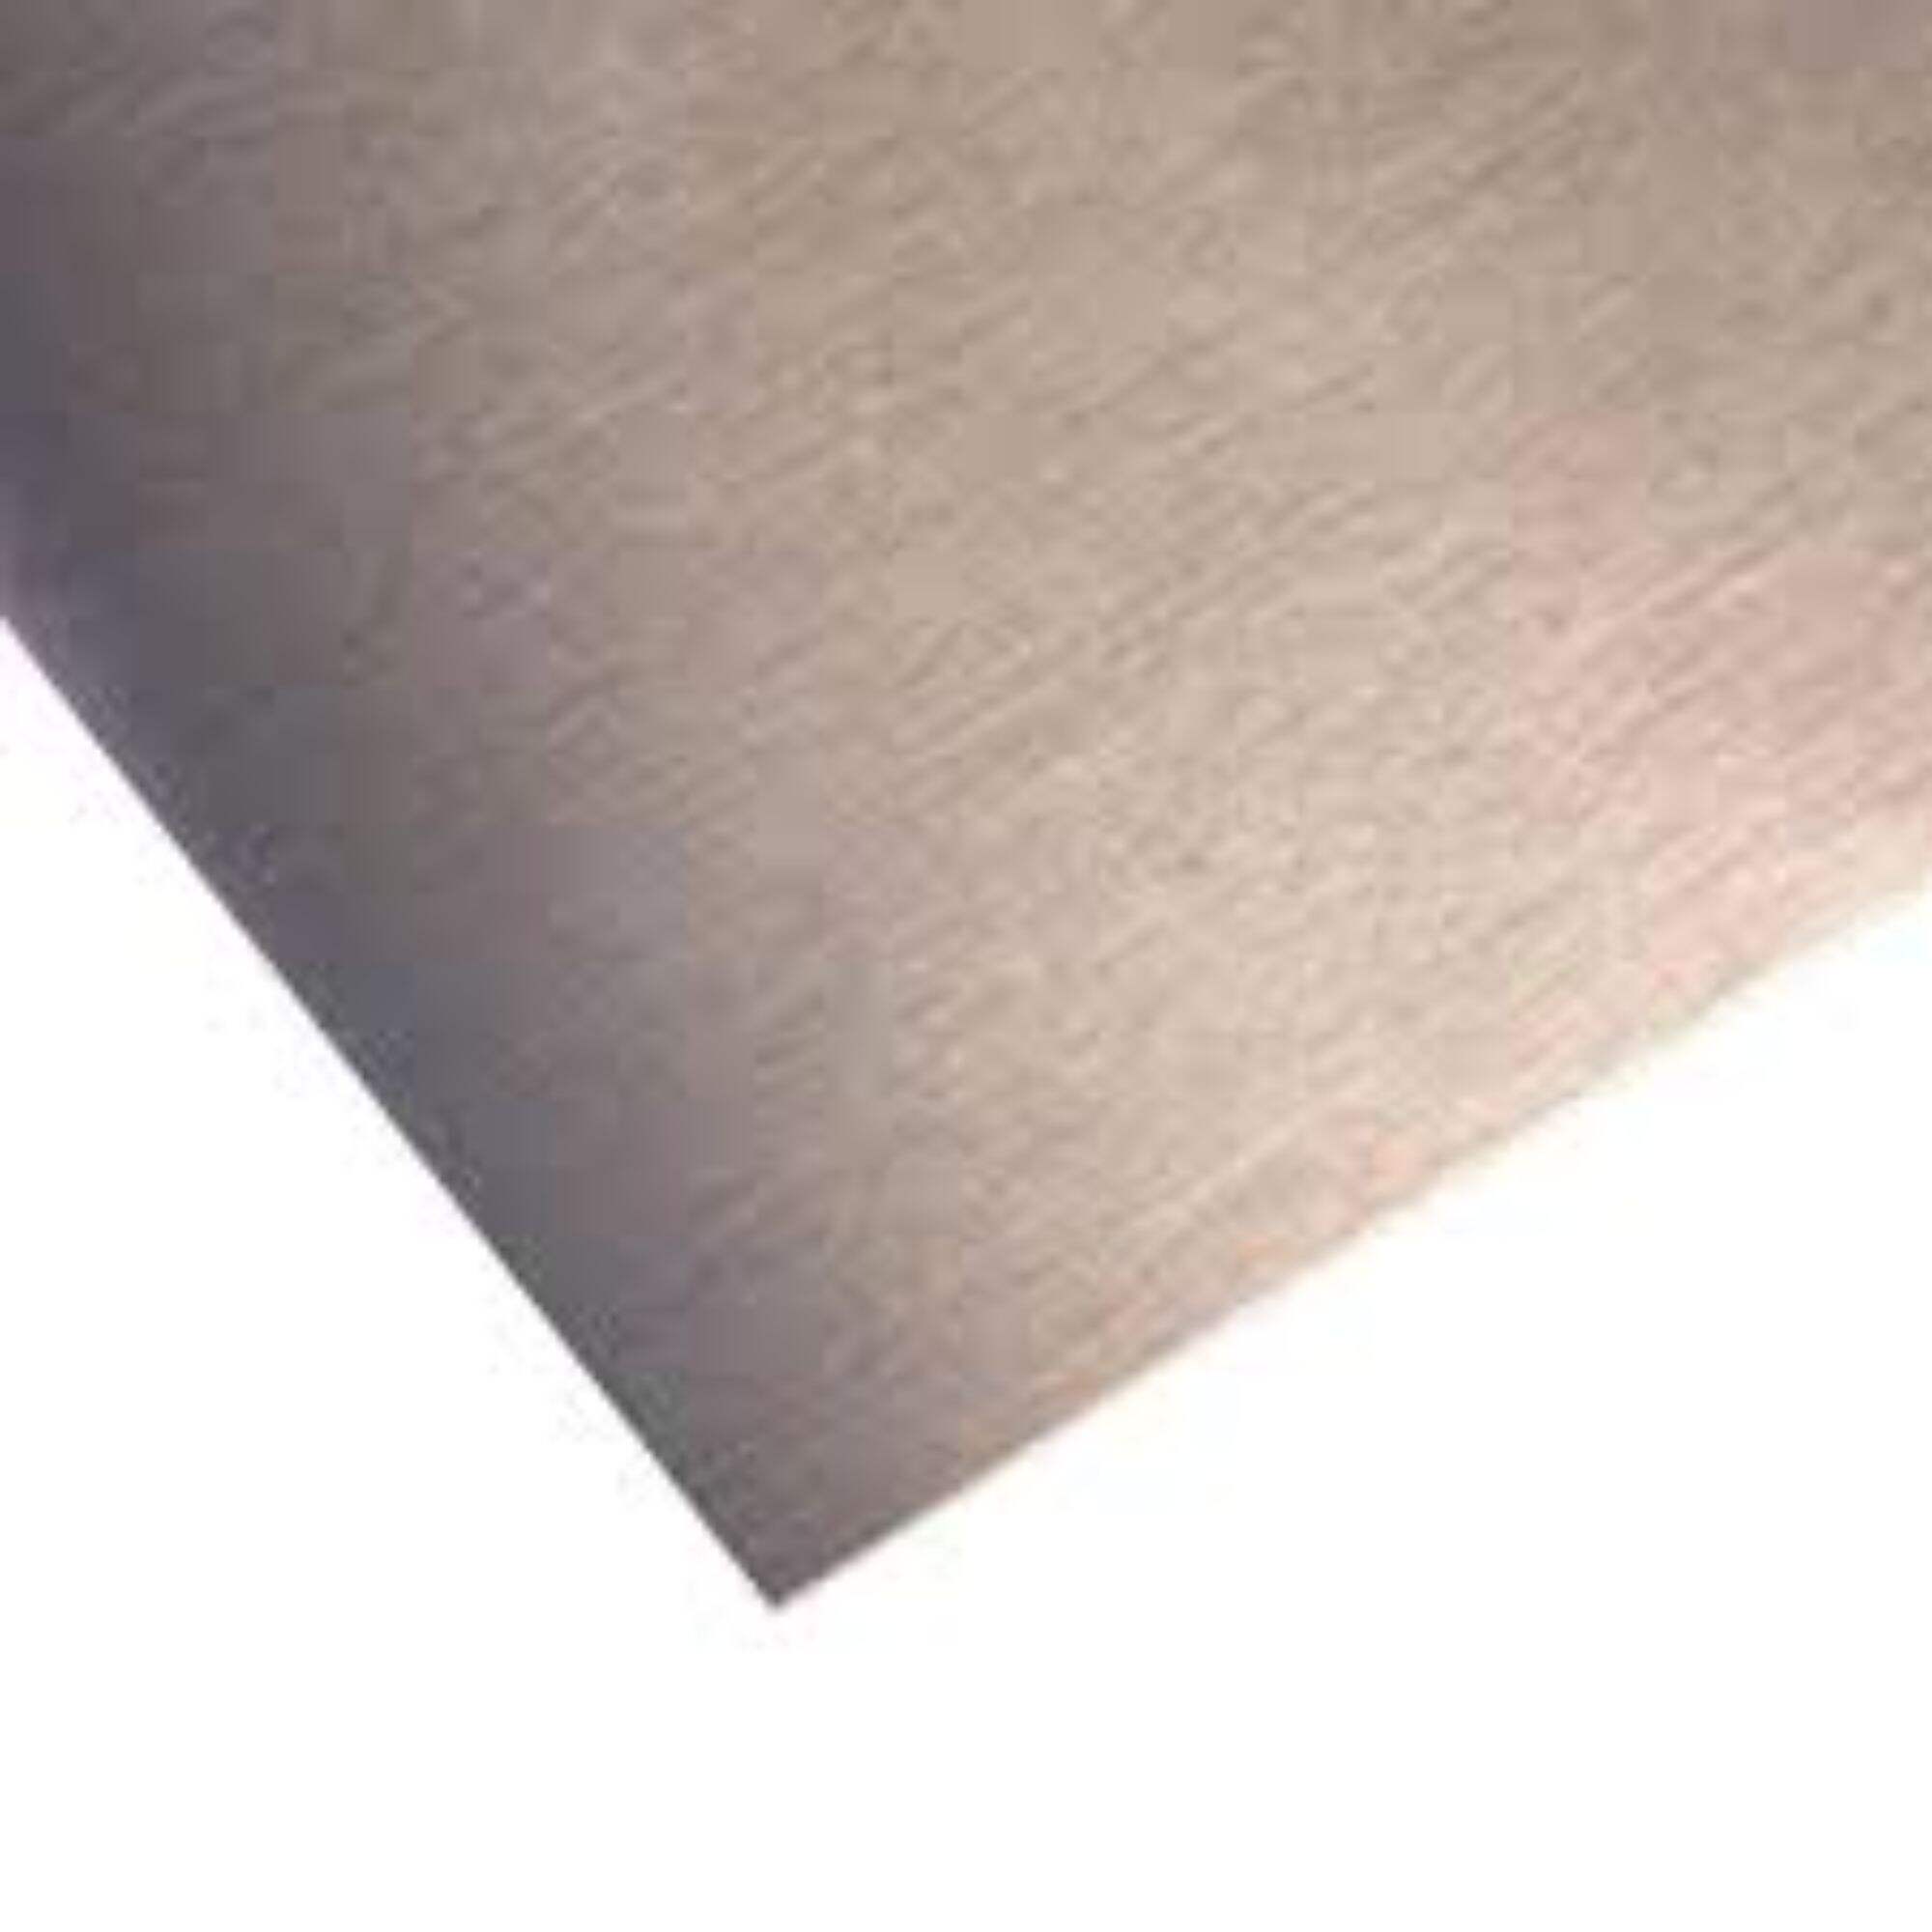 3mm Thin Brushed Stainless Steel Sheet 